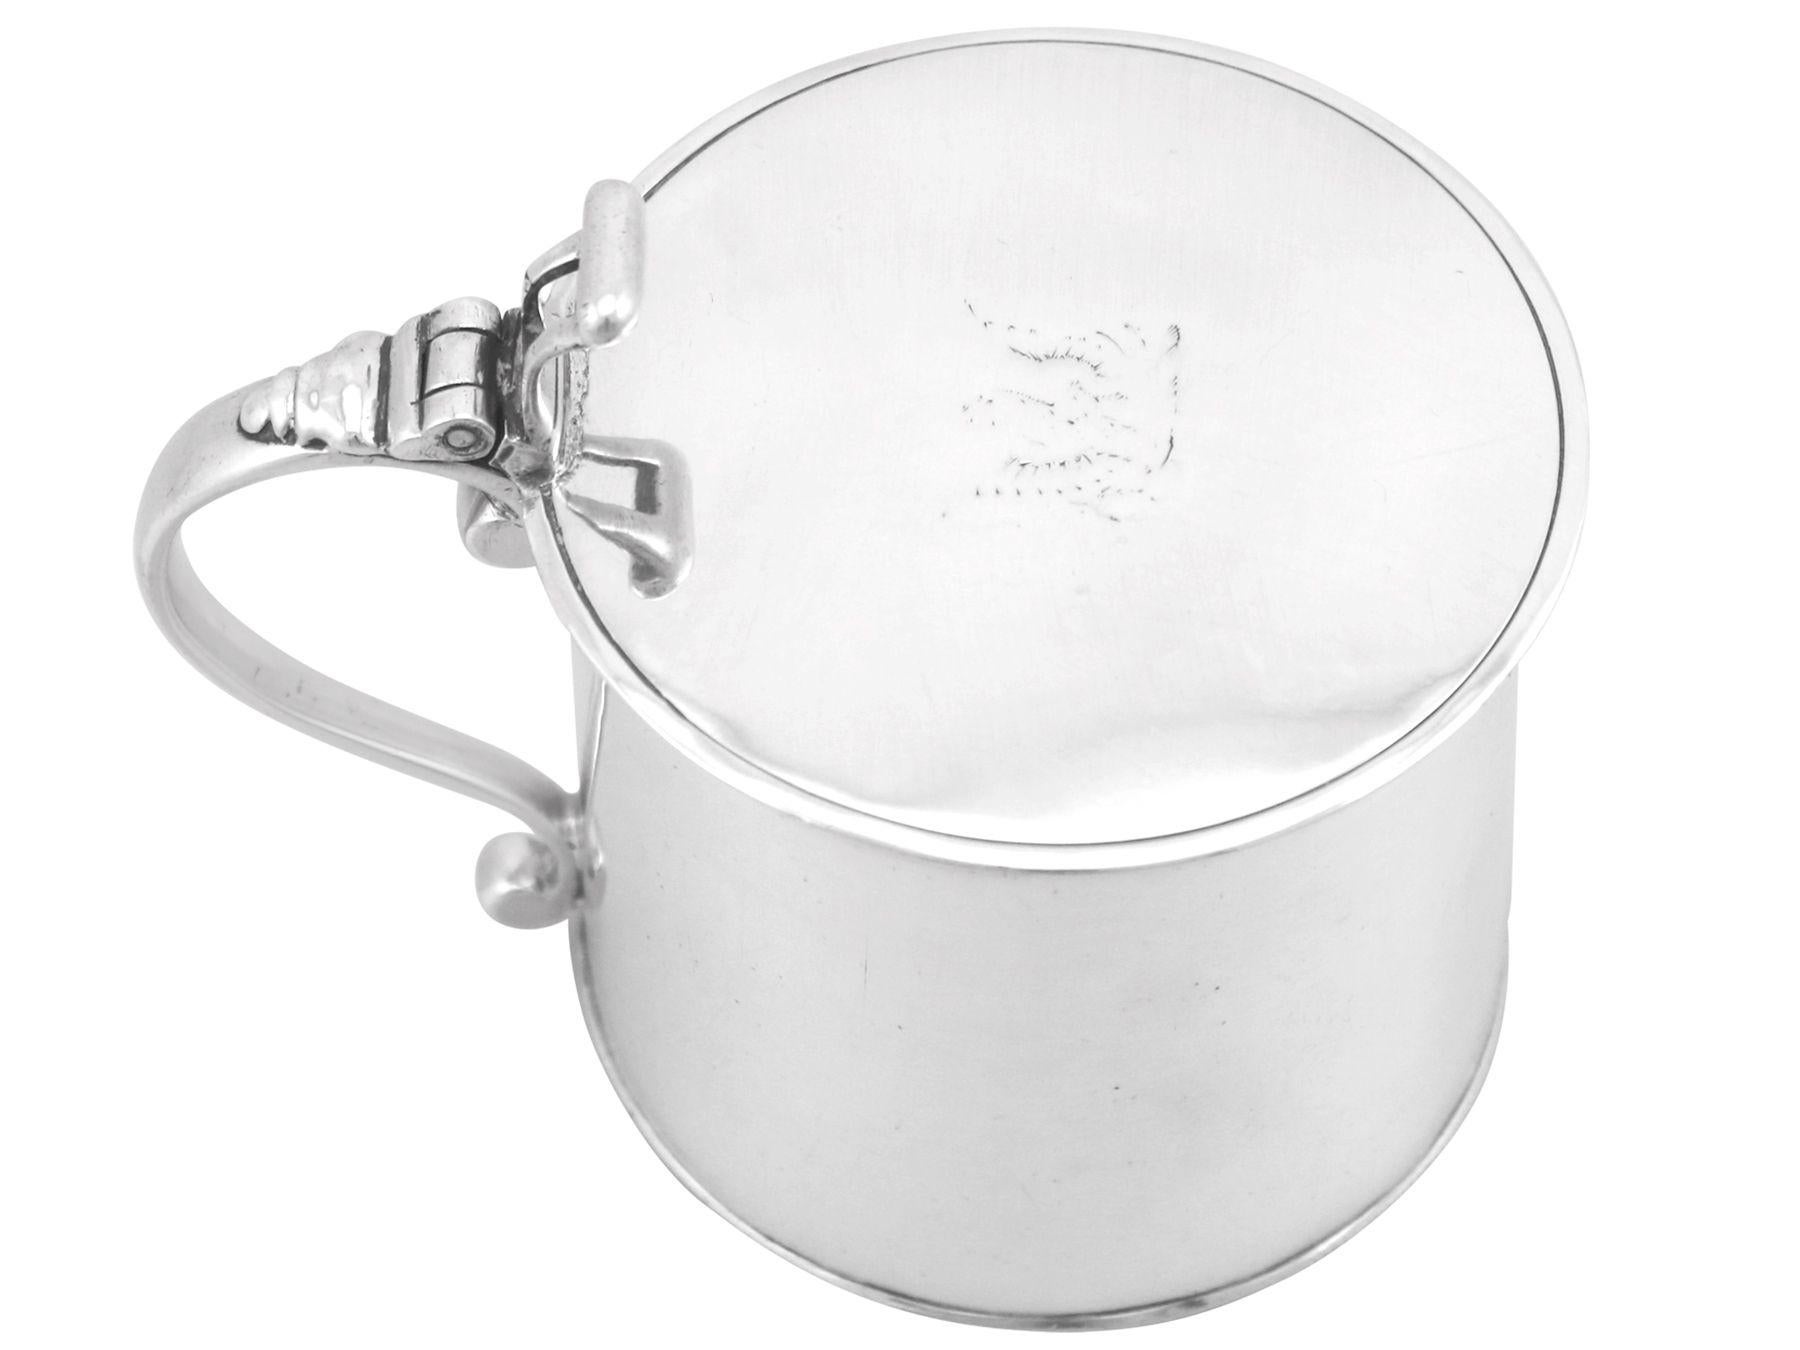 A exceptional antique 18th century English sterling silver drum mustard pot; an addition to our silver cruets / condiments collection.

This exceptional antique George III sterling silver mustard pot has a plain drum form with applied borders to